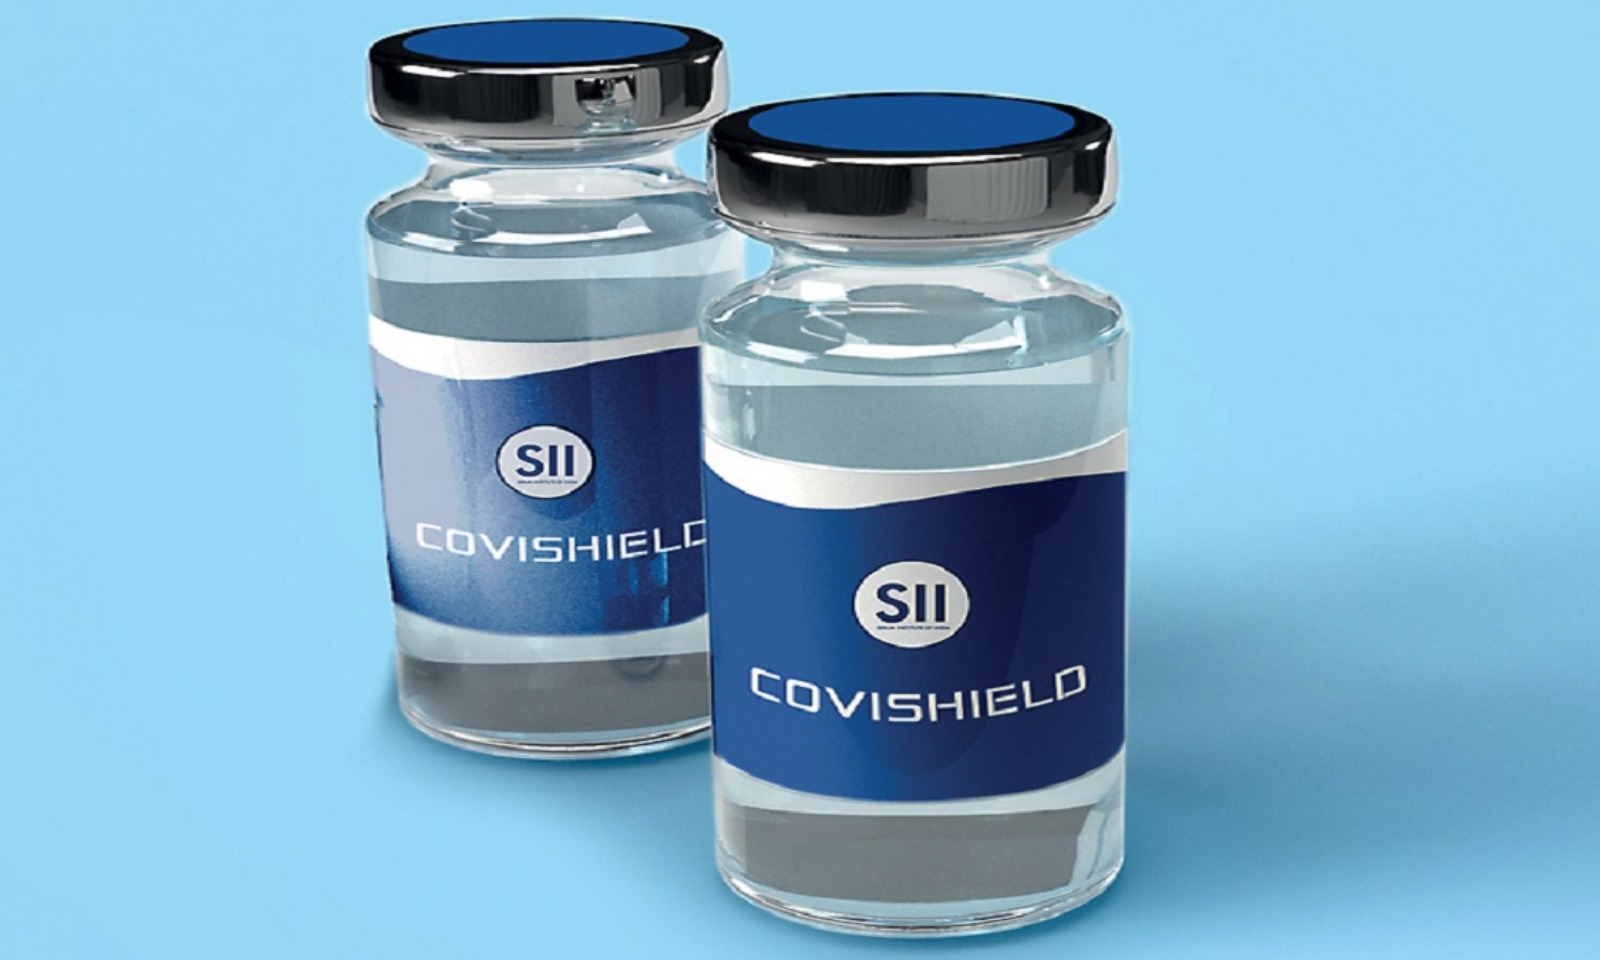 What did the petitioner demand in the Supreme Court regarding Covishield?